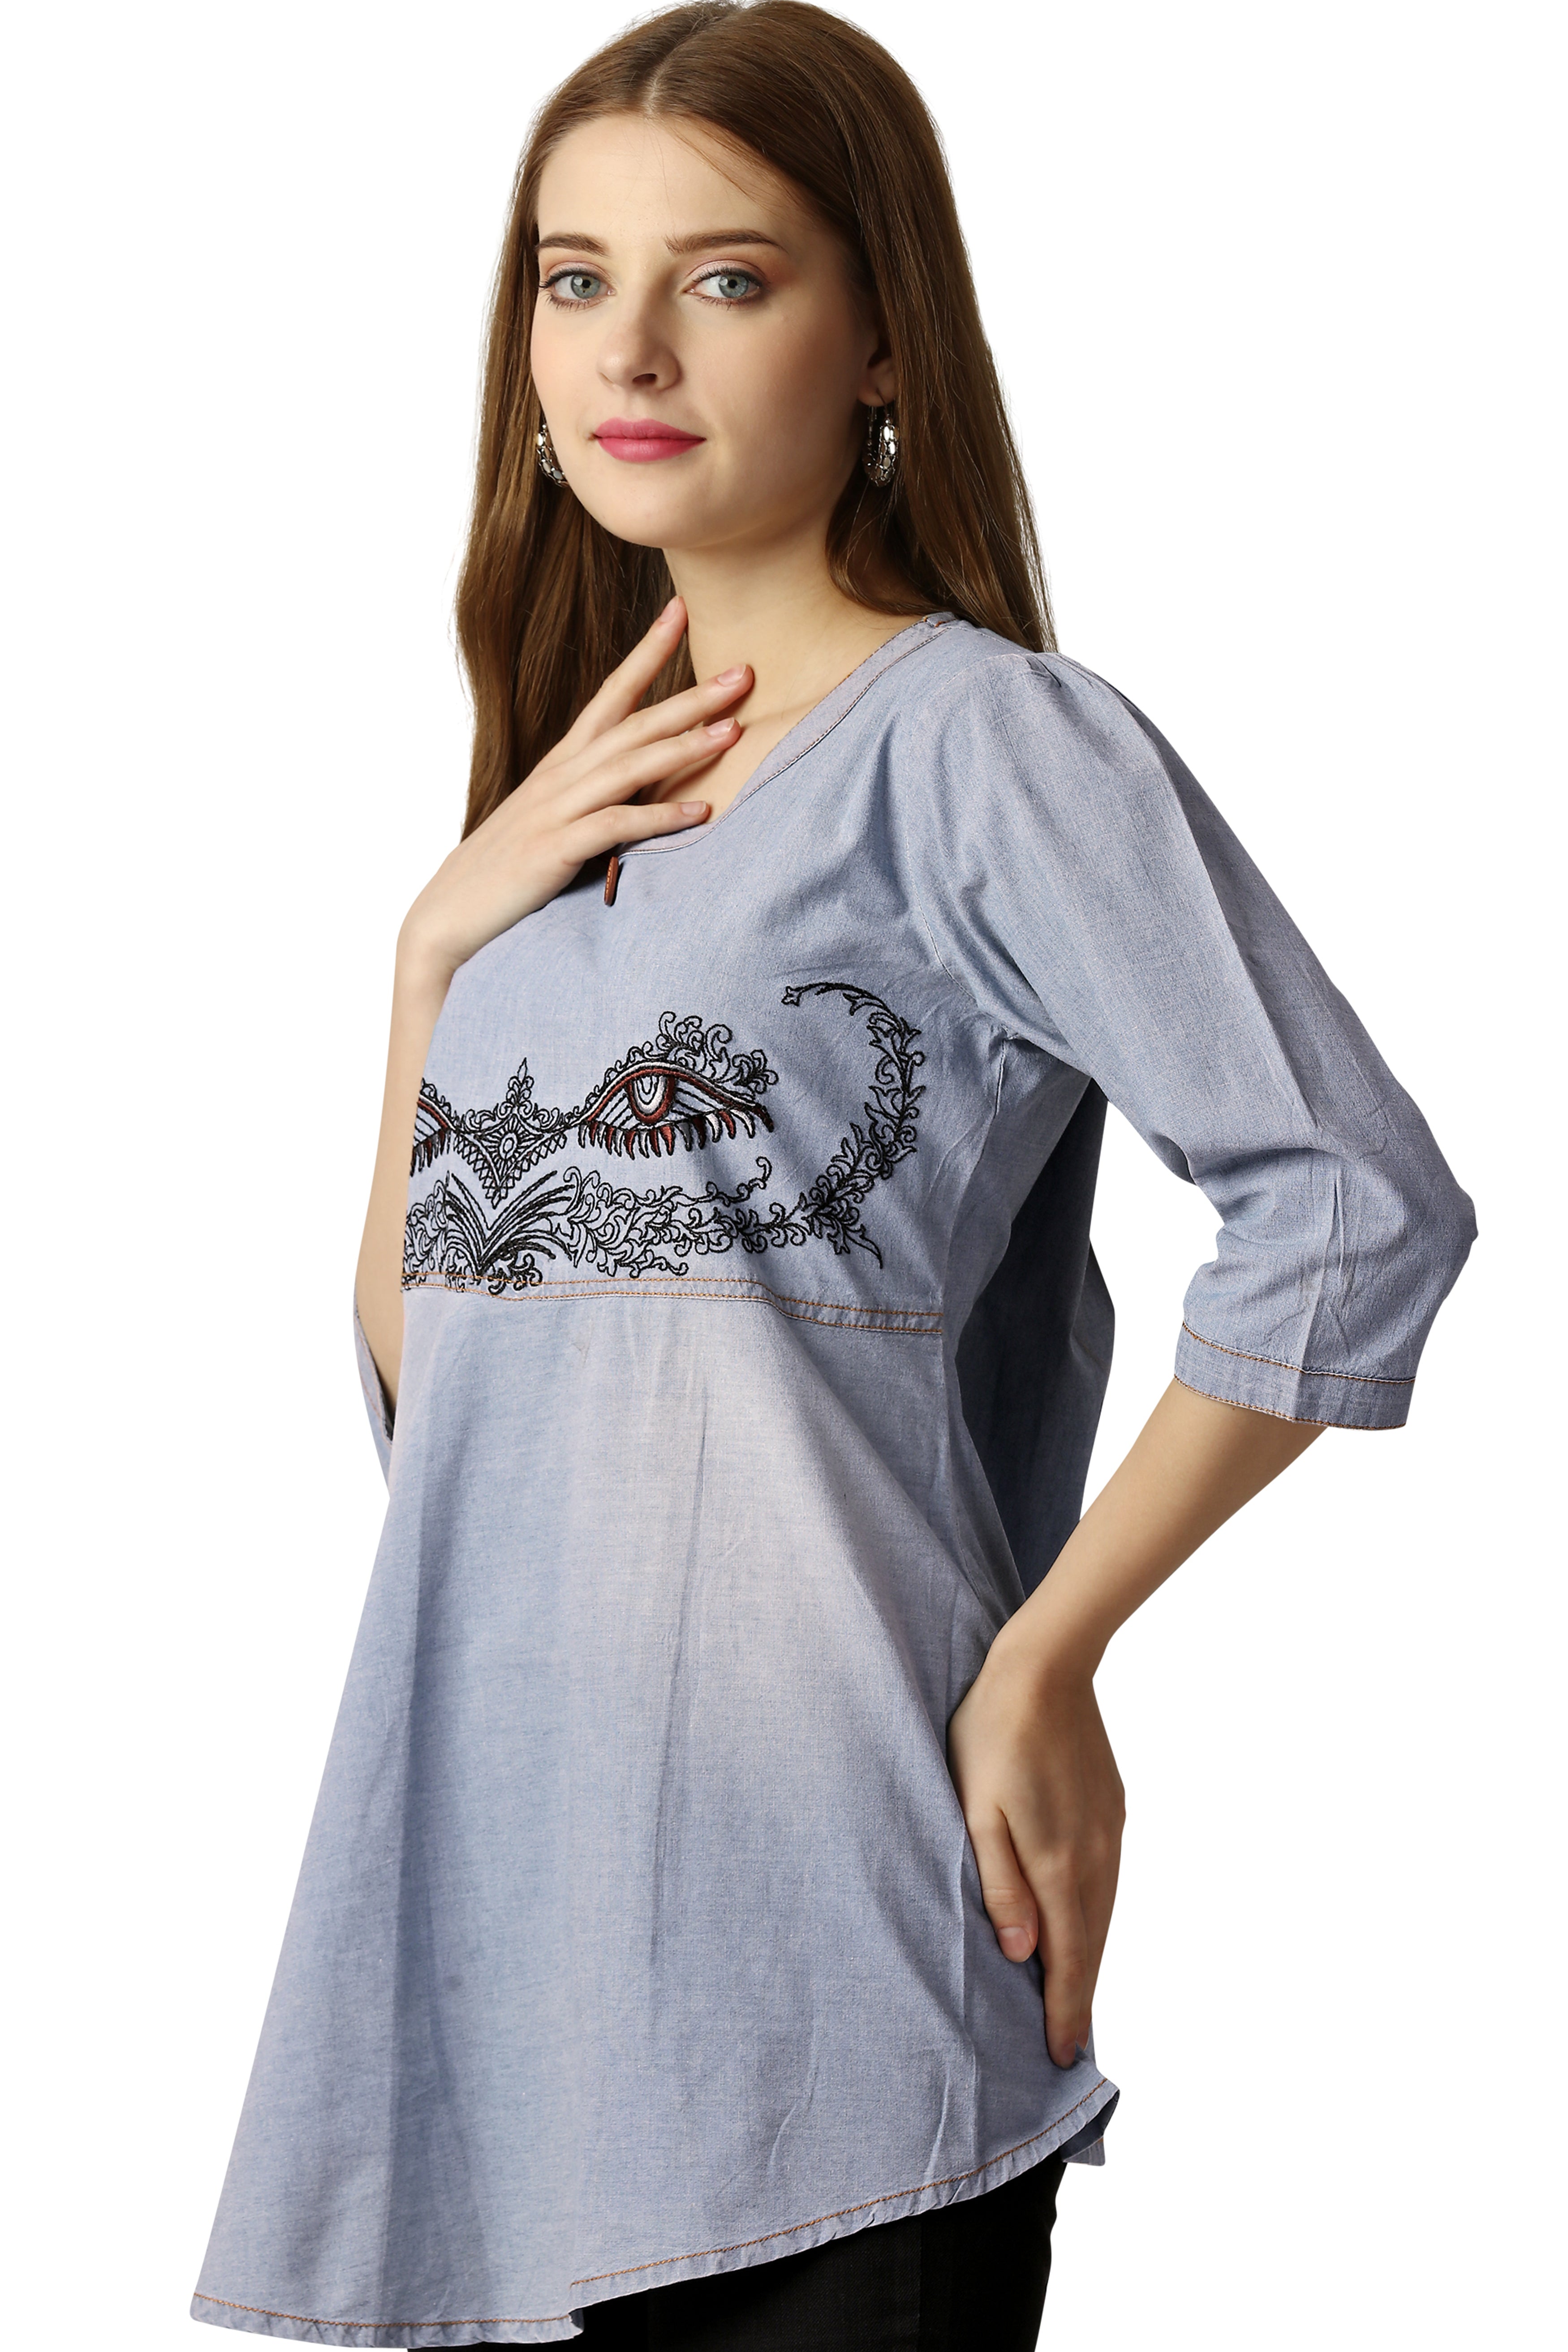 Buy Women Tops Online at French Crown India